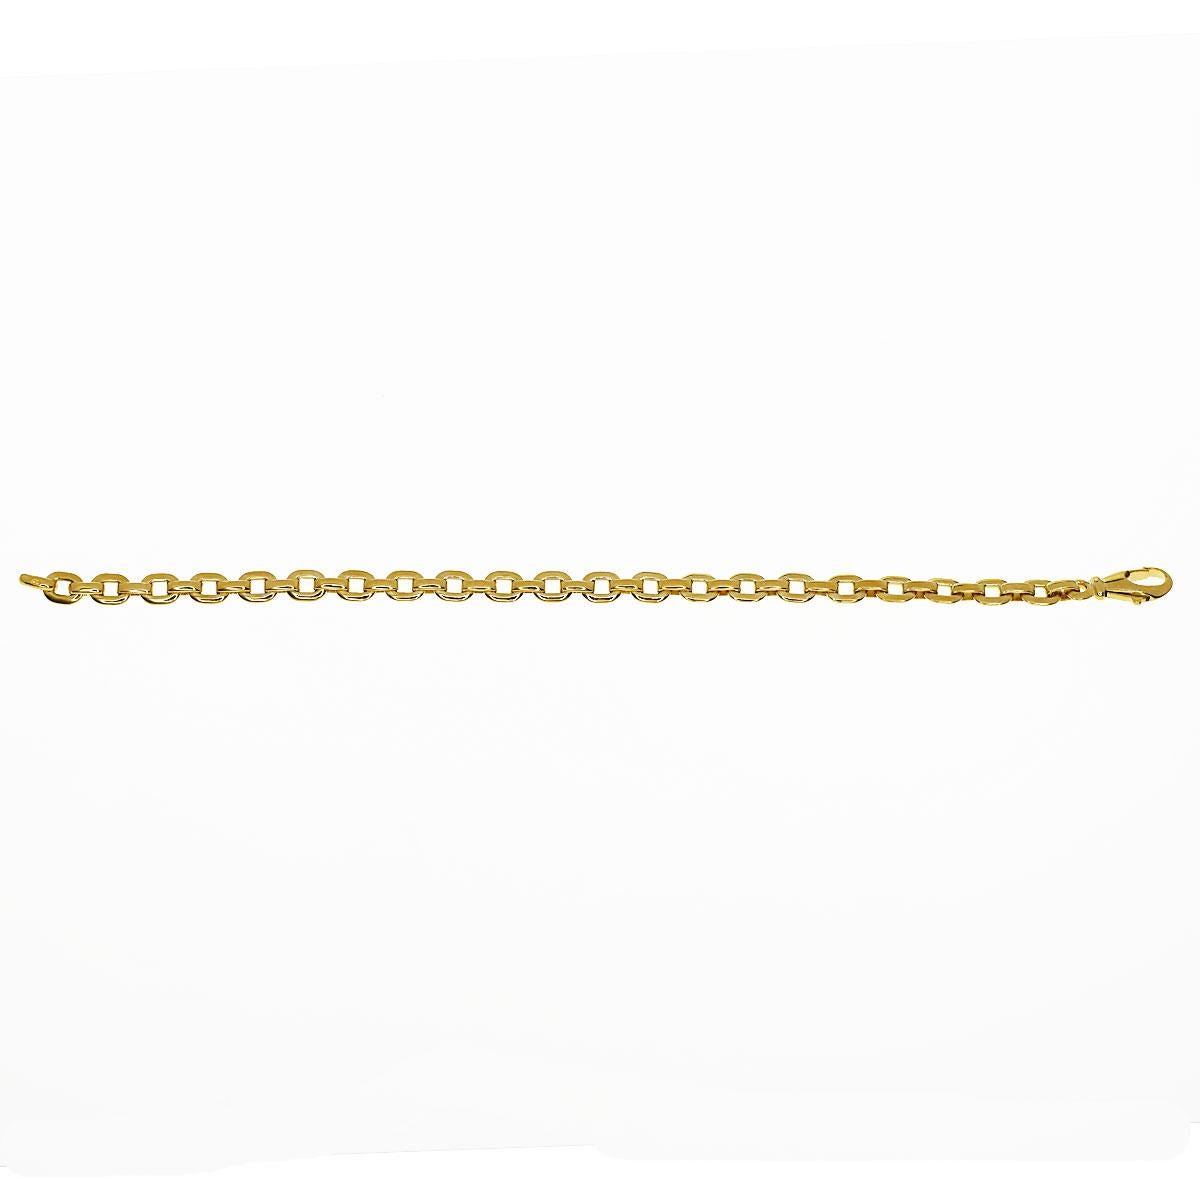 Brand:Cartier
Name:Meplat chain bracelet
Material:750 K18 YG Yellow Gold
Weight:約14.4g(Approx)
Band length(inch):19cm / 7.48